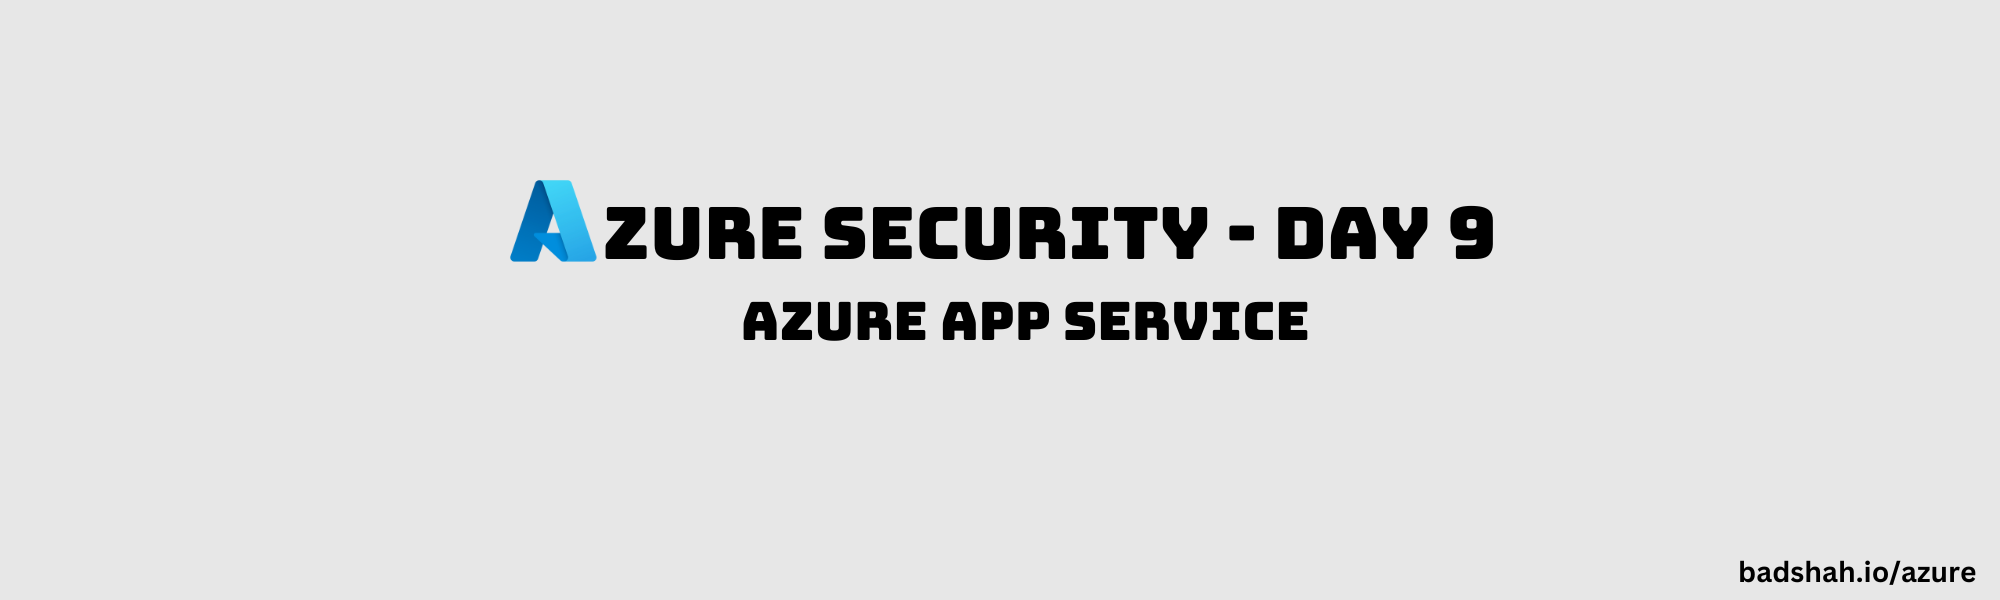 /azure/app-service/cover-image.png